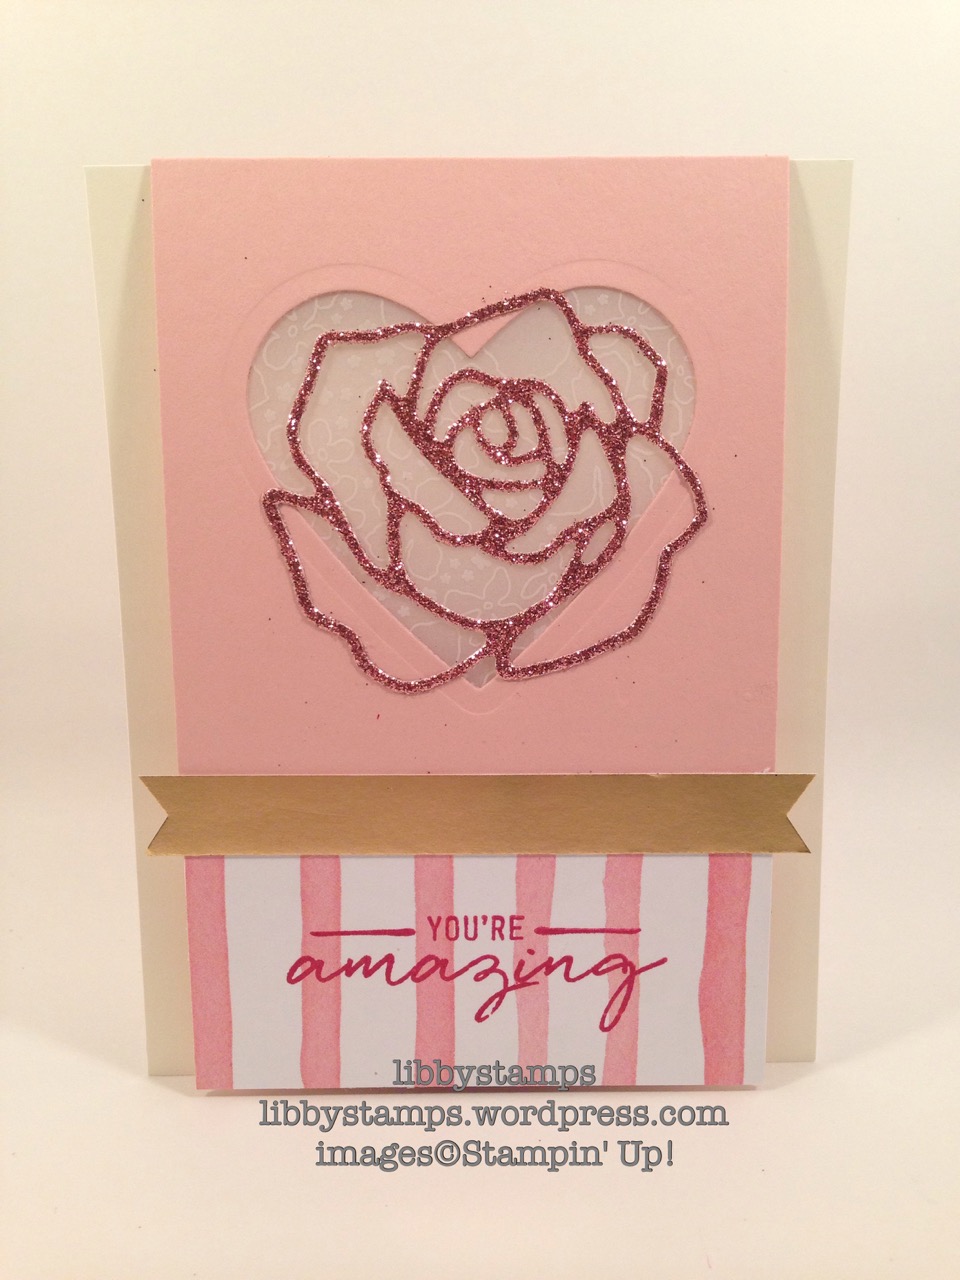 libbystamps, stampin up, Watercooler Wishes Card Kit, Rose Garden Thinlits, Hearts Collection Framelits, Banner Triple Punch, Blushing Bride Glimmer Paper, Birthday Bouquet DSP, Botanical Gardens Vellum, Fold Over Card